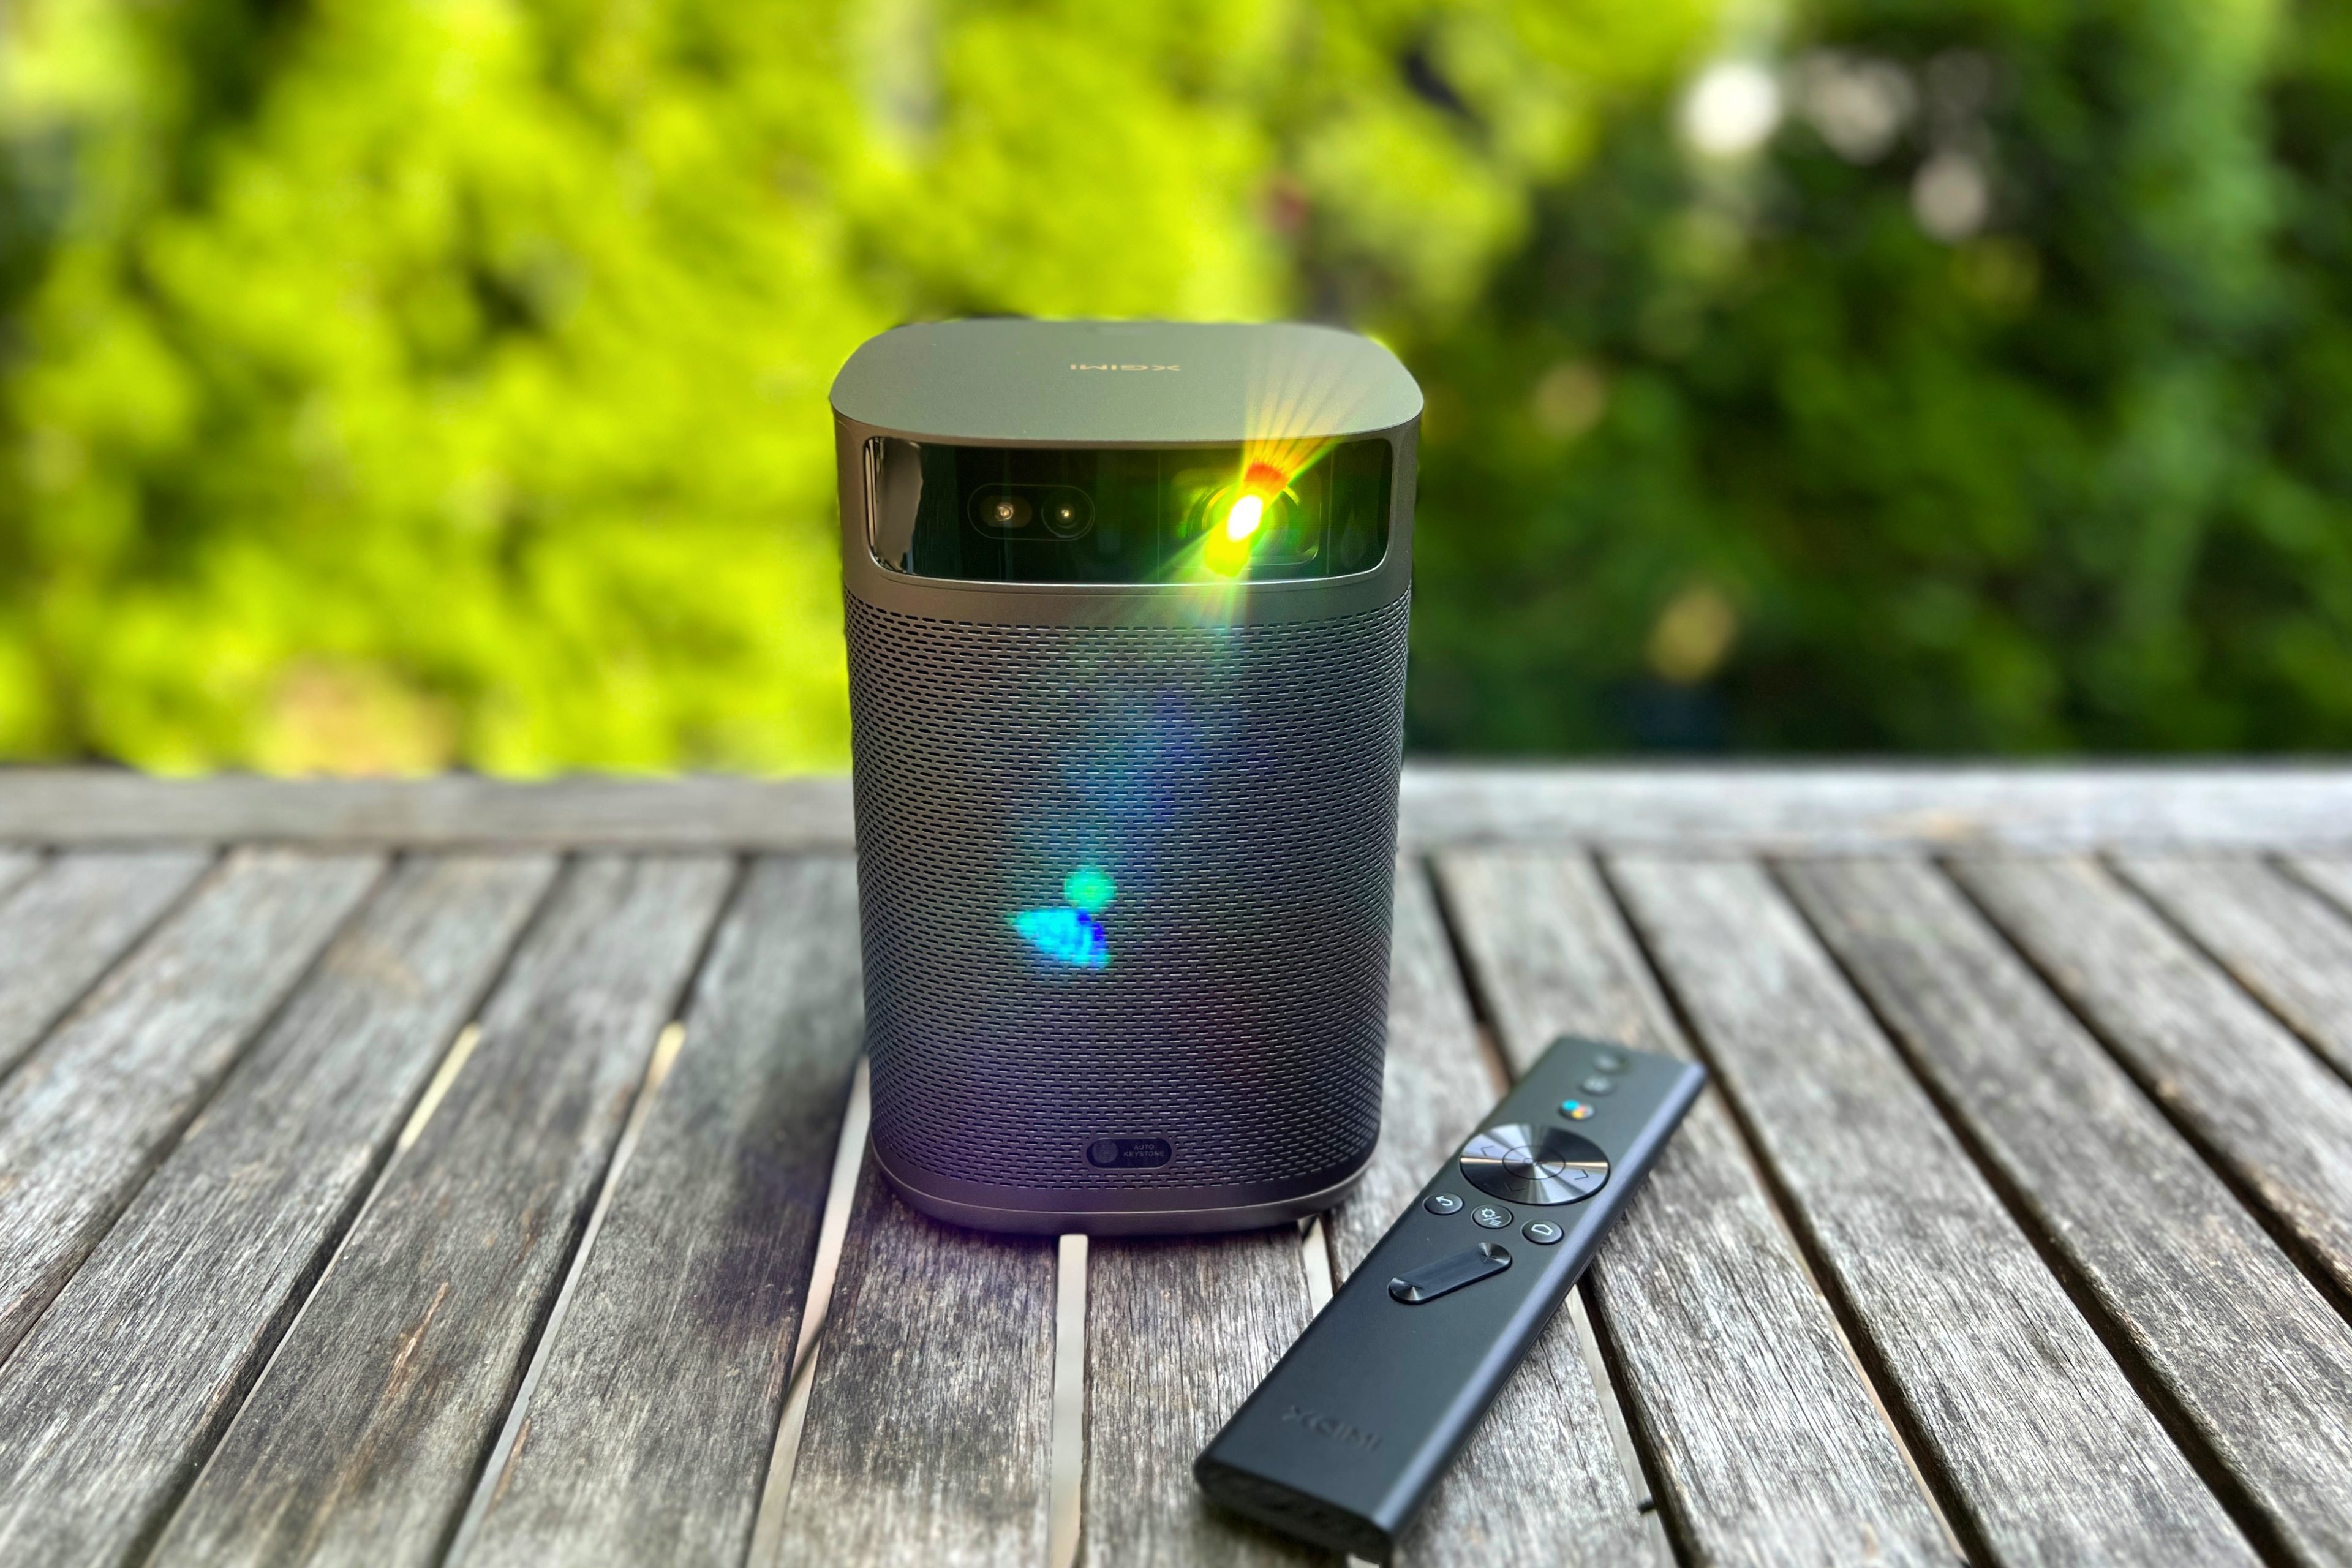 XGIMI MoGo 2 Pro Projector Review